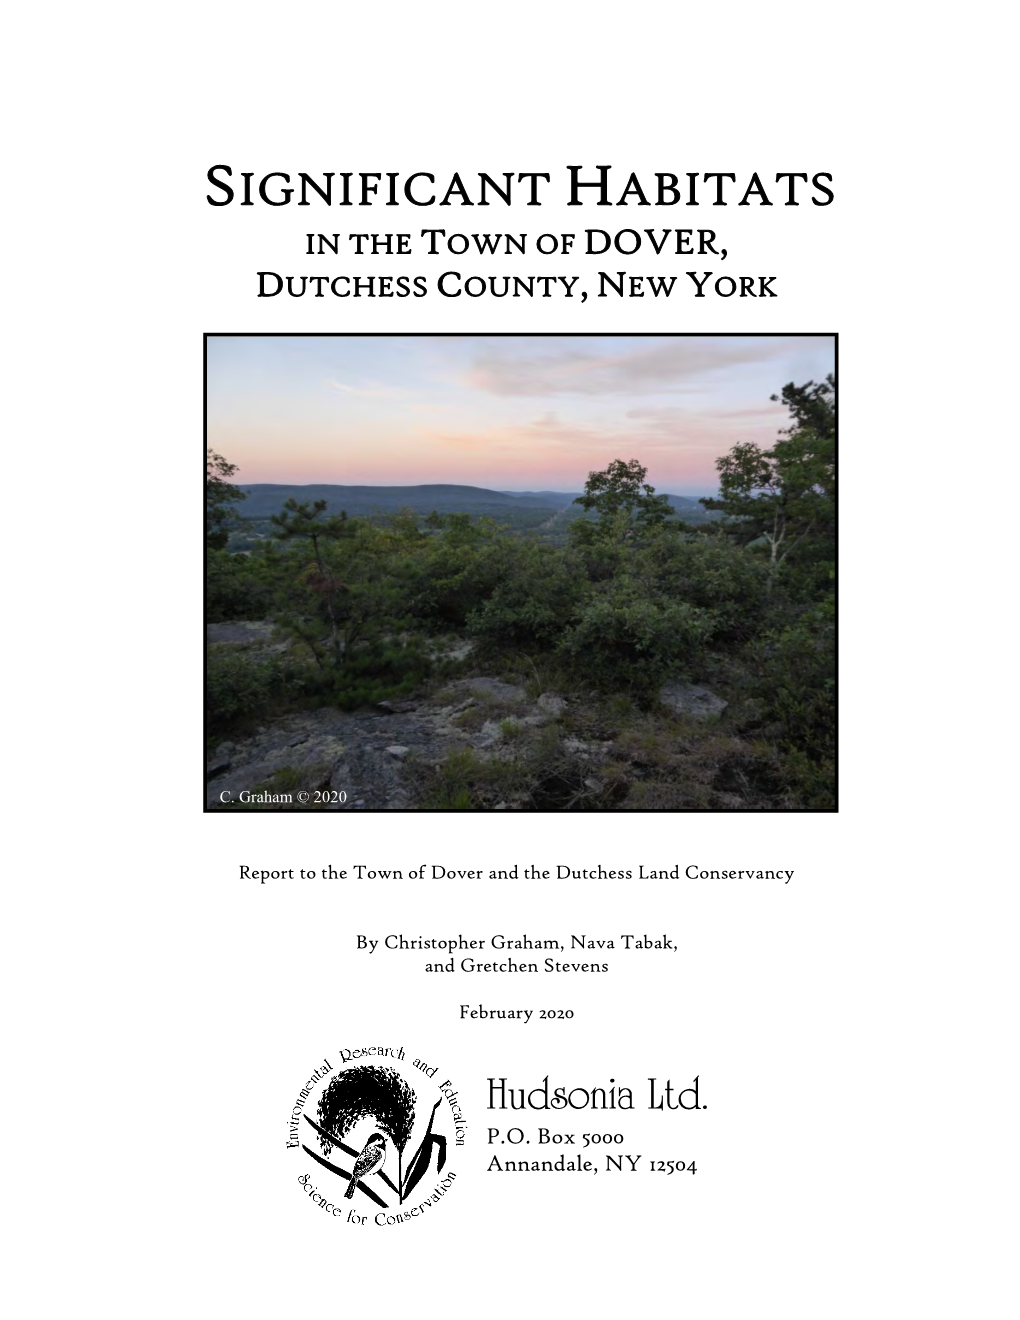 Significant Habitats in the Town of Dover, Dutchess County, New York